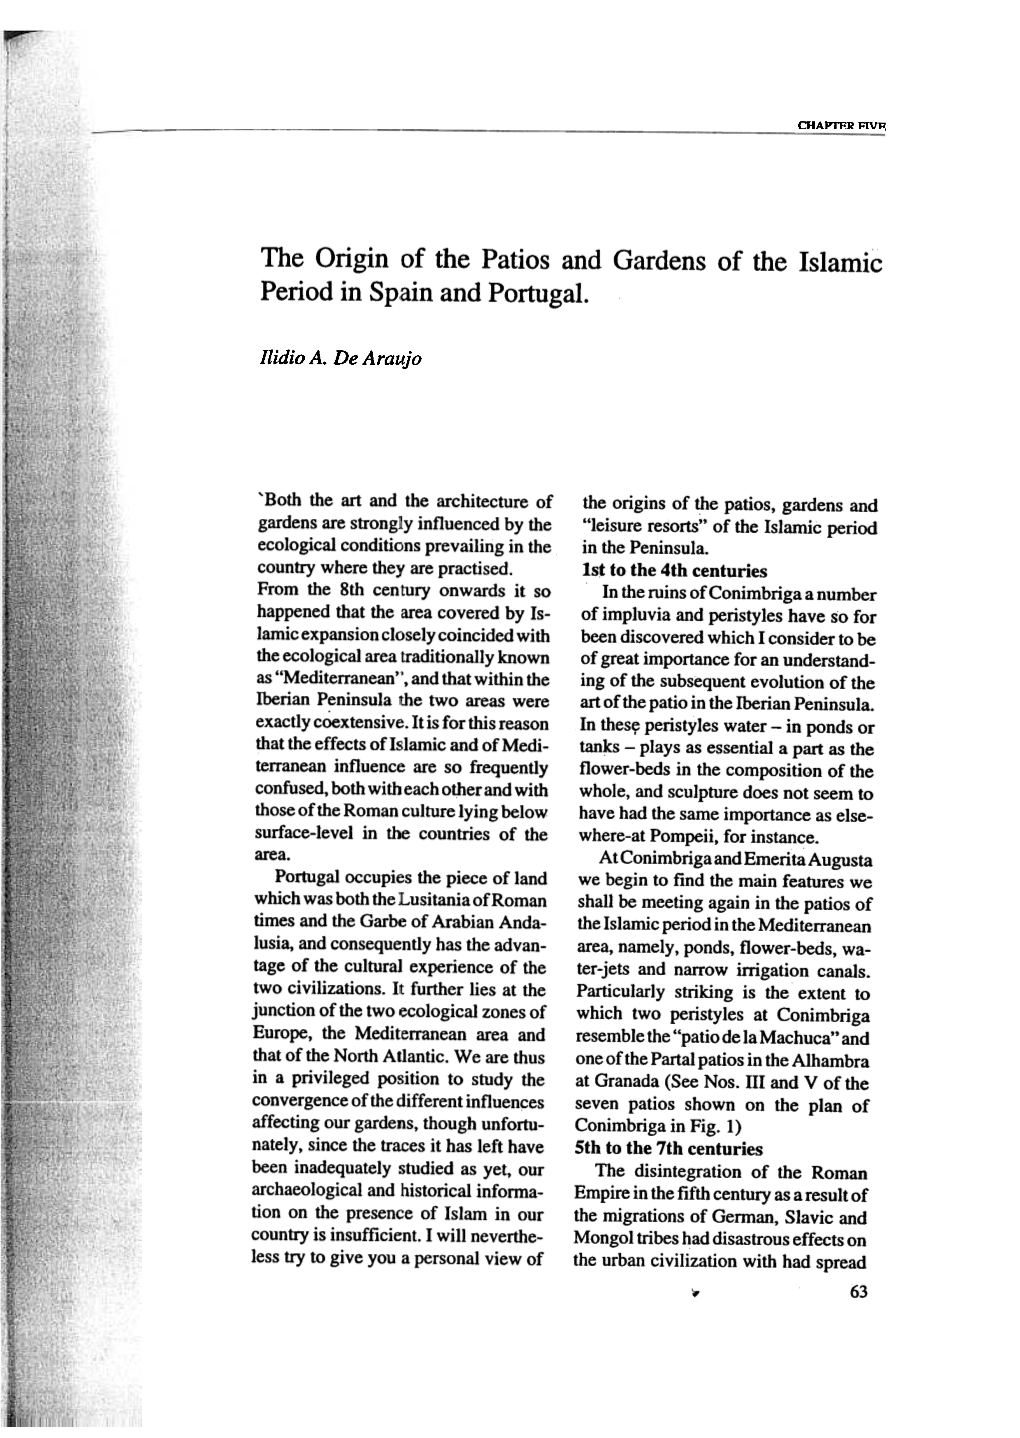 5. the Origin of the Patios and Gardens of the Islamic Period In